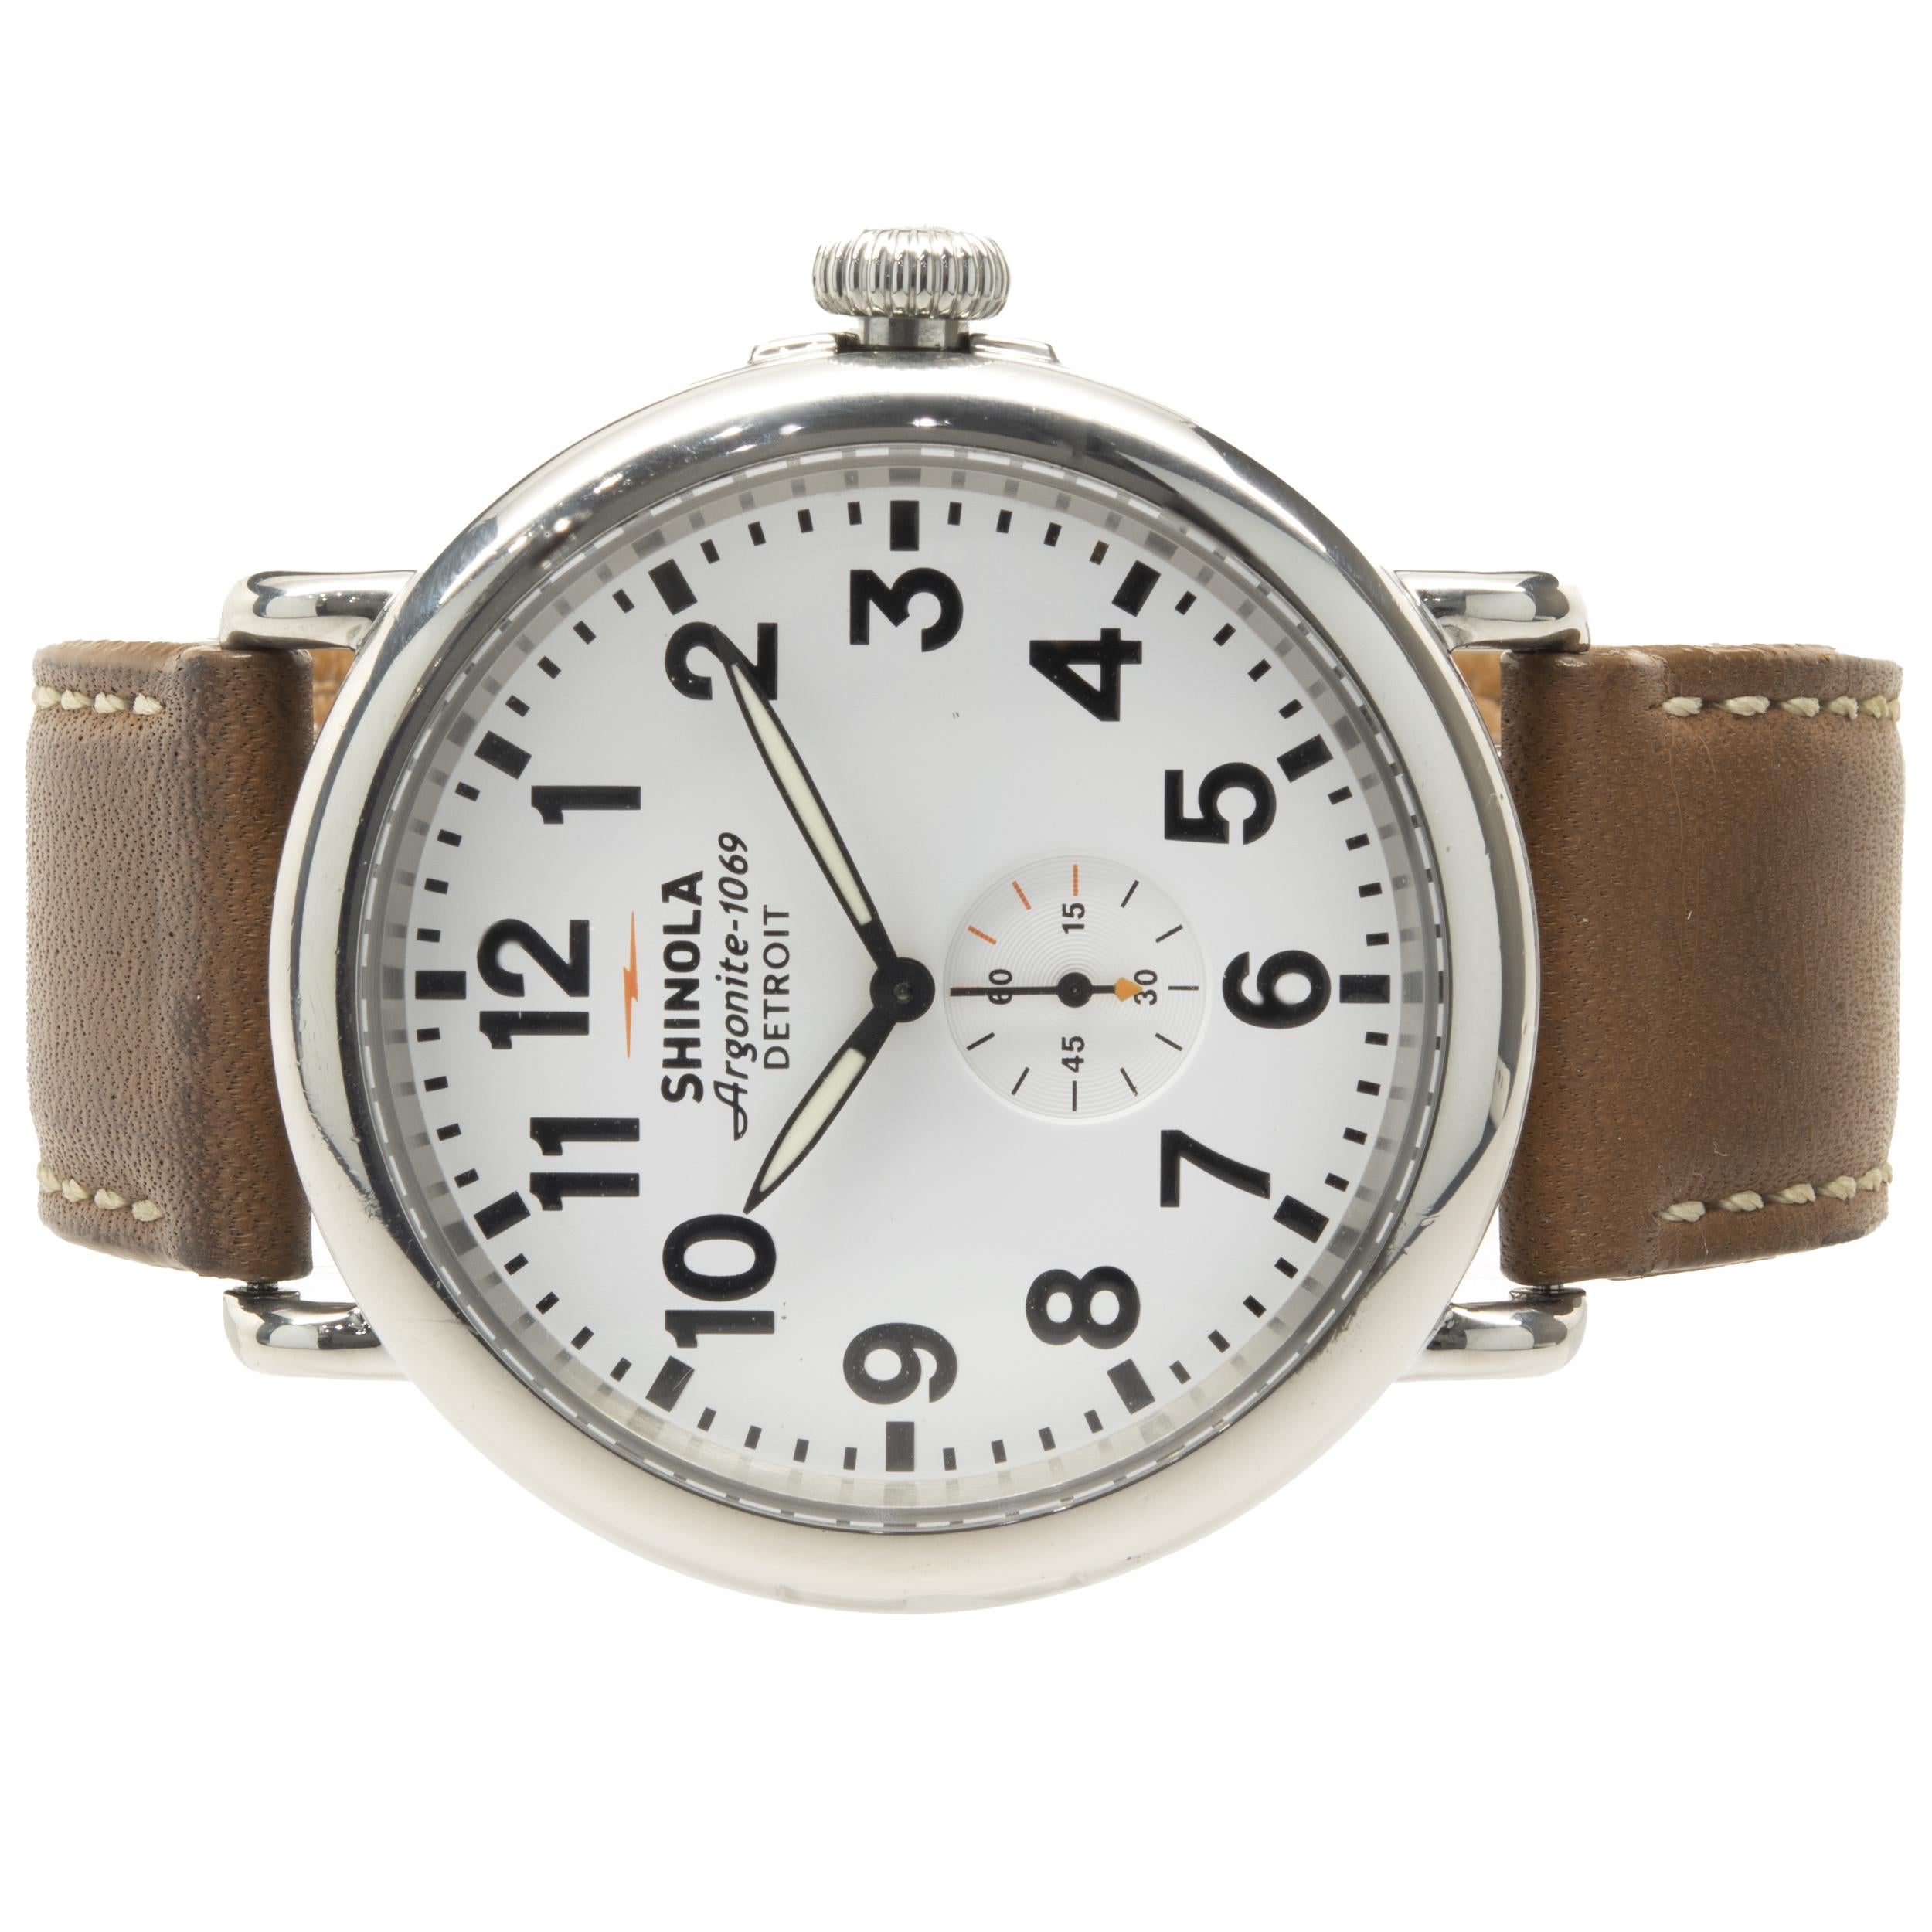 Movement: quartz
Function: hours, minutes, seconds
Case: 47mm round, smooth bezel
Bracelet: Shinola brown leather strap with buckle
Dial: white arabic dial, small seconds
Serial # S0100104XXX
Reference # 1069

Complete with original box and